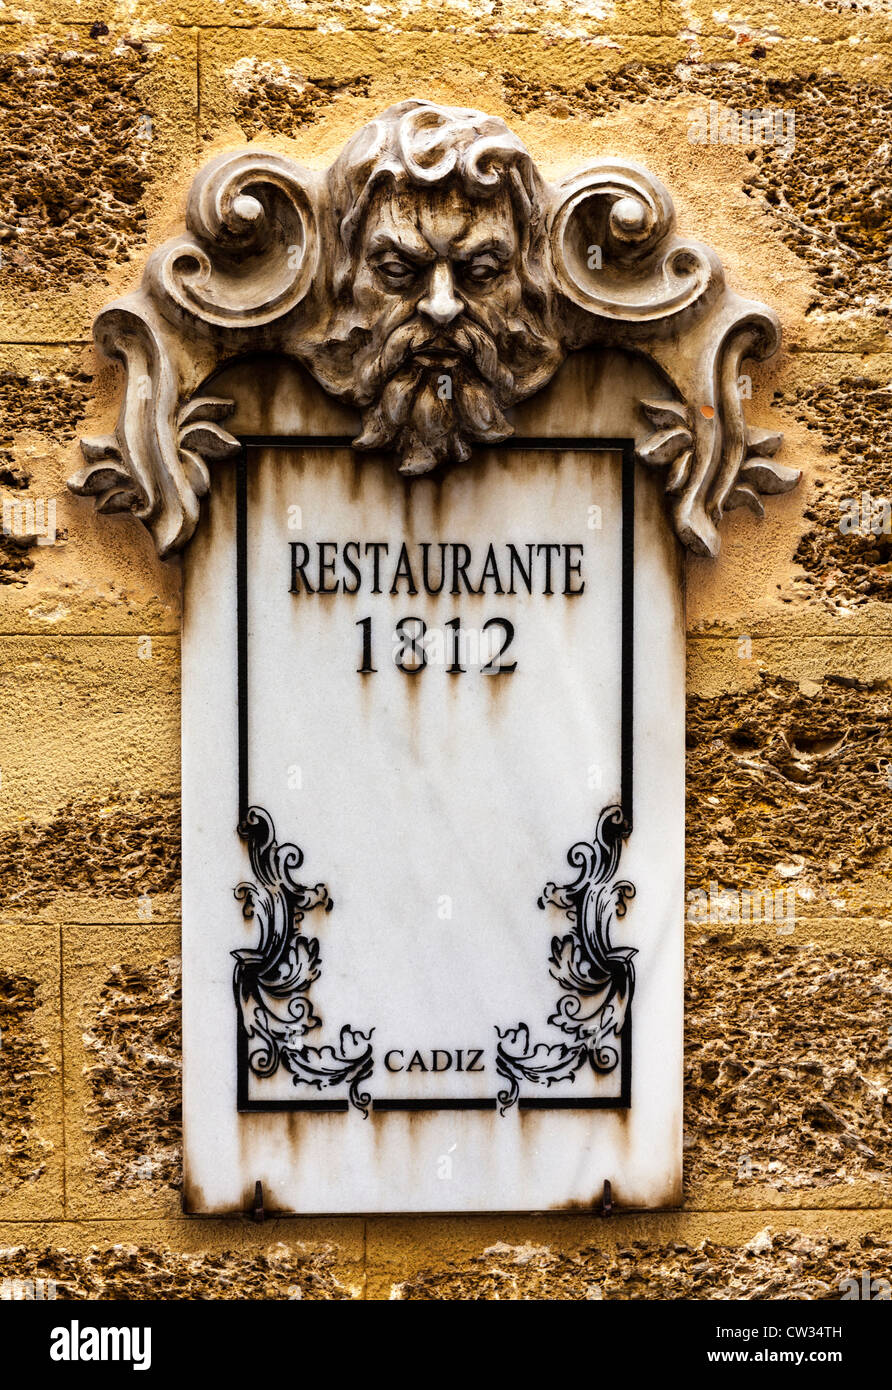 Cadiz, Andalusia, Spain, Europe. Old fashioned restaurant wall sign dated 1812. Stock Photo